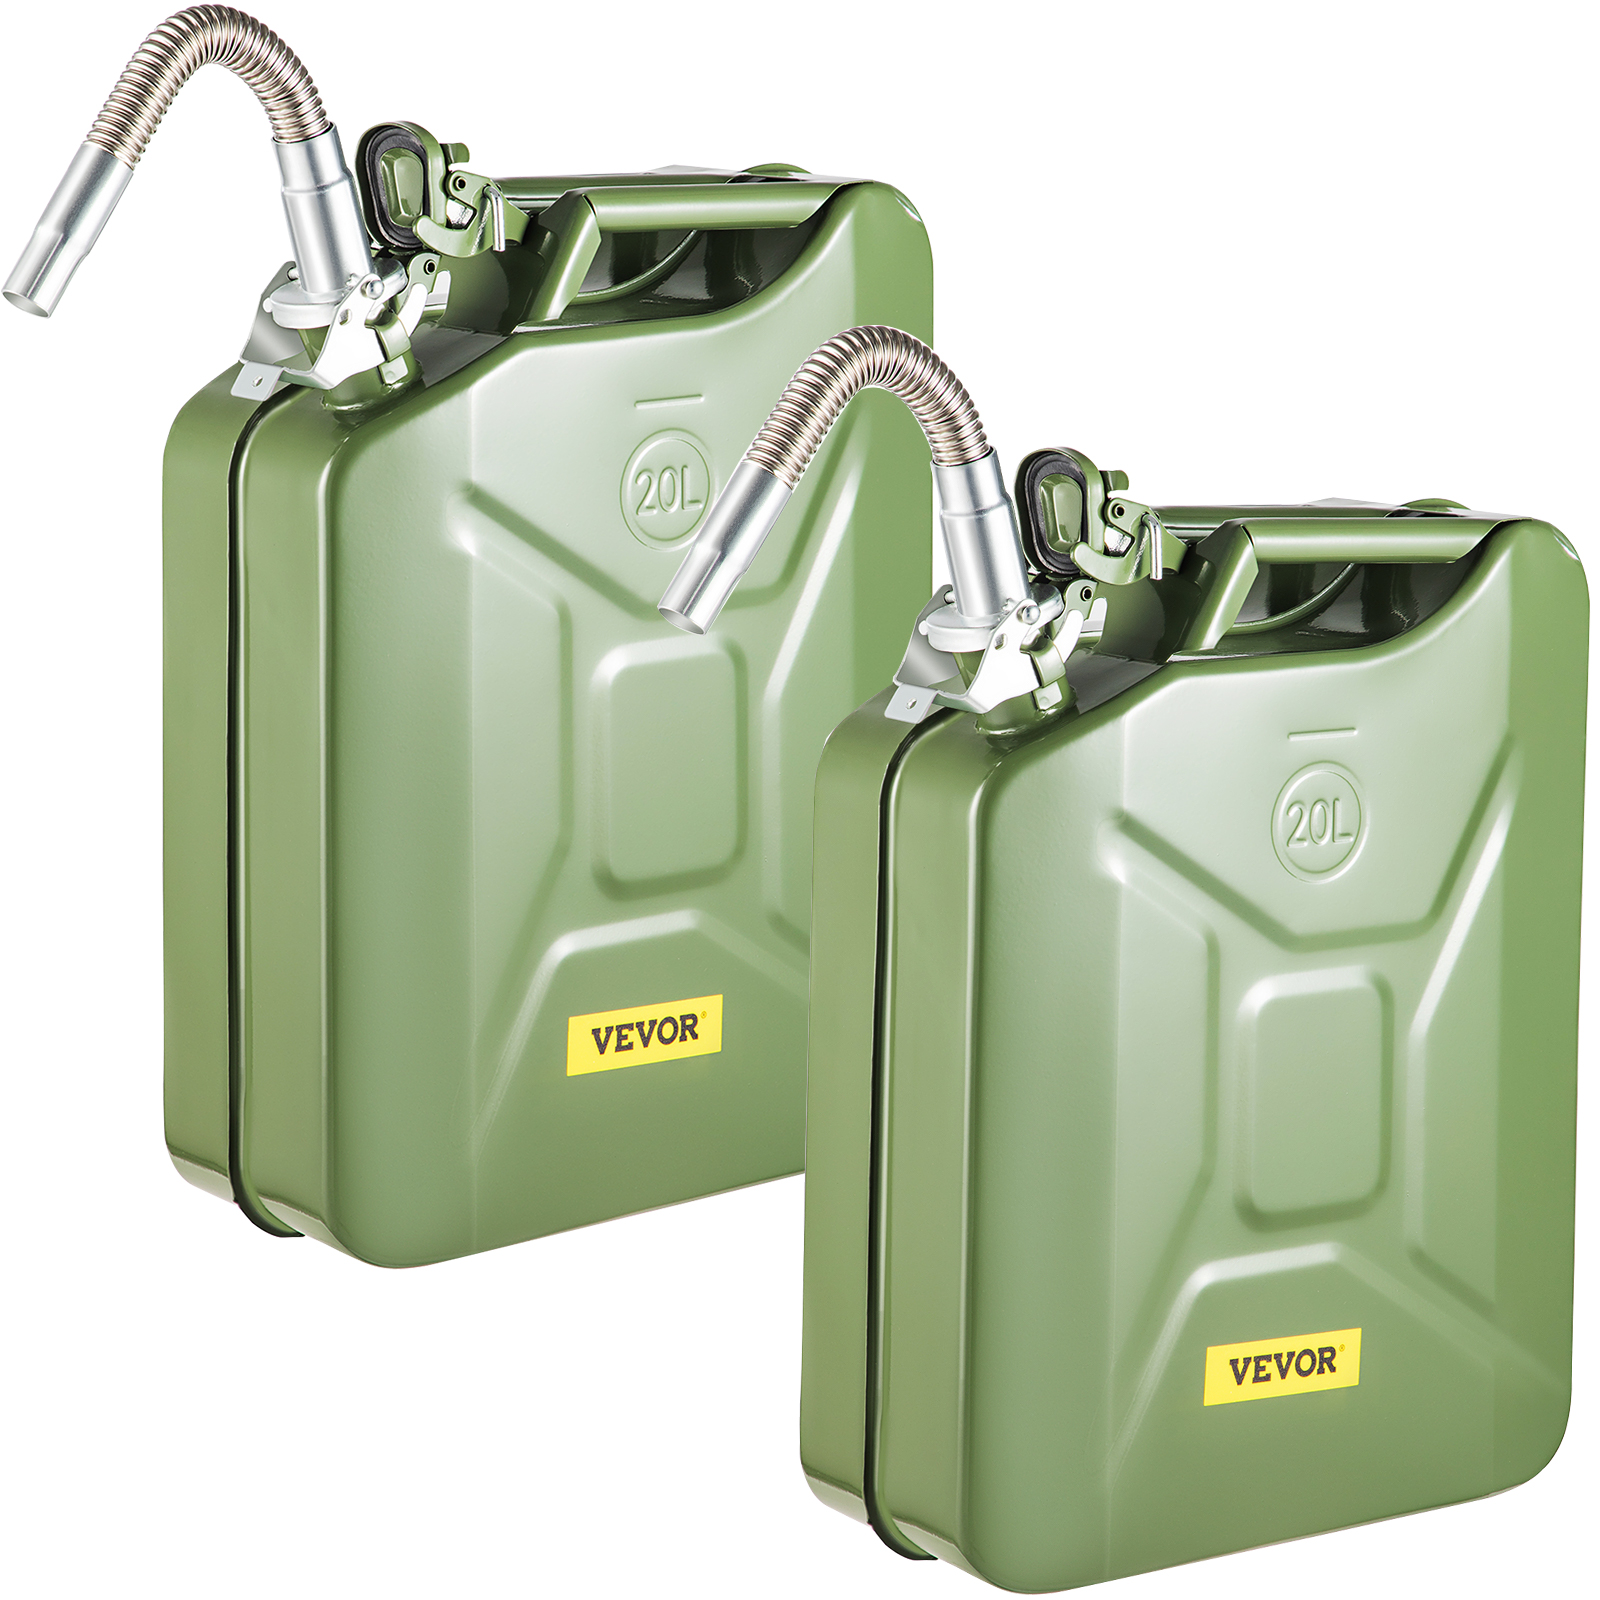 5 Gallon,Steel Fuel Can,Yellow